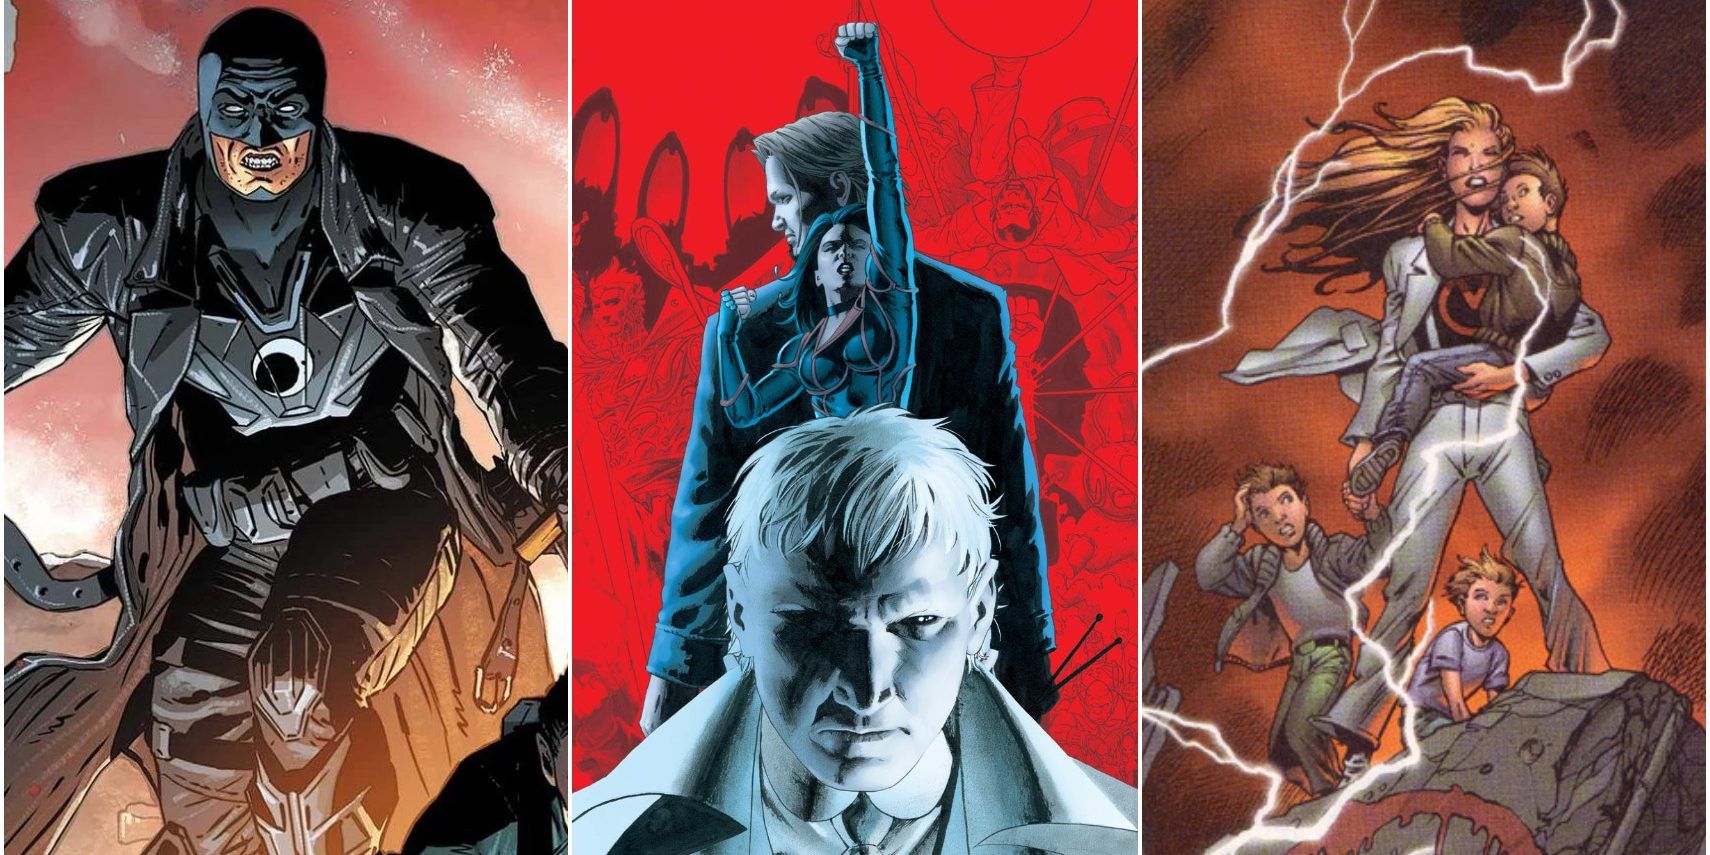 Wildstorm Comics heroes who could lead the Justice League. Midnighter. Jenny Sparks. Elijah Snow.